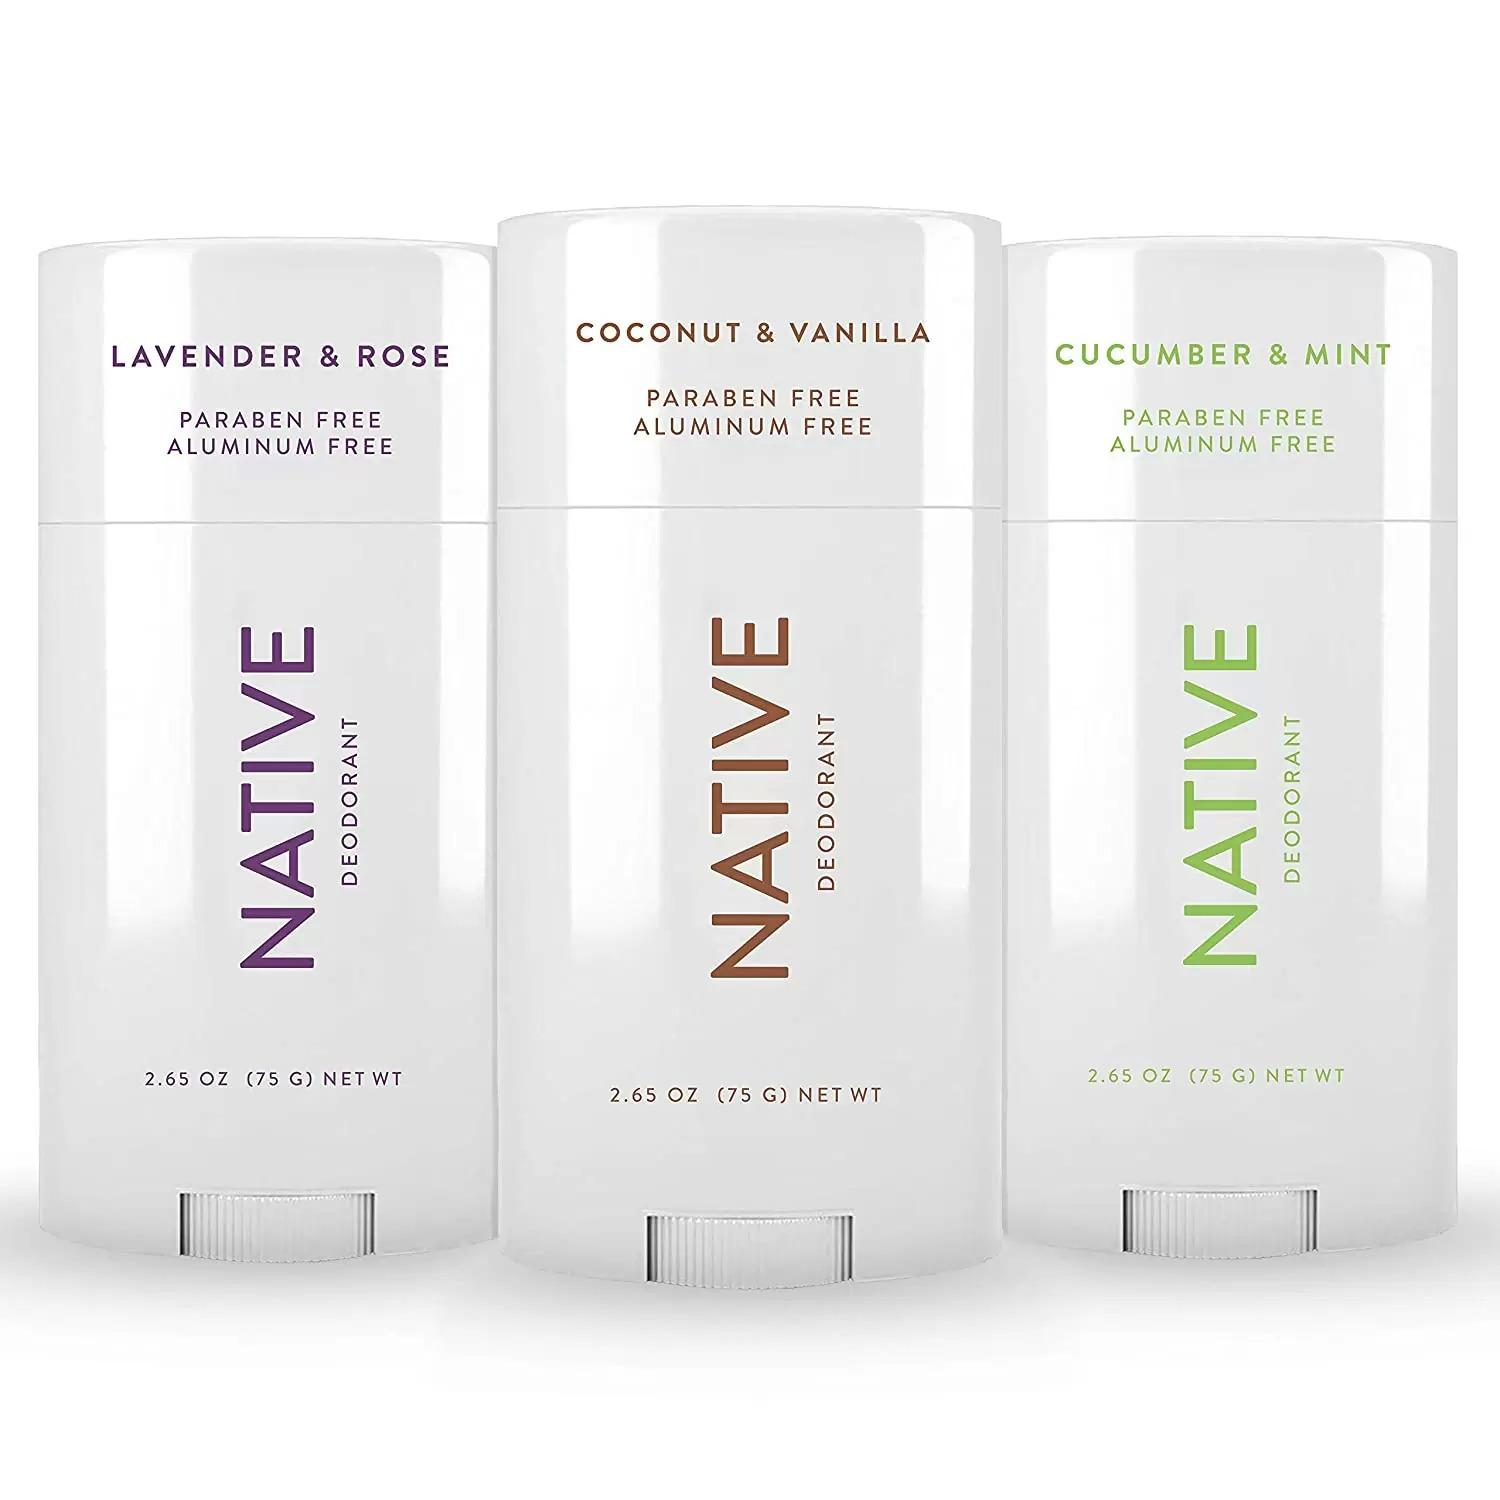 3 Native Deodorant for $22.58 Shipped